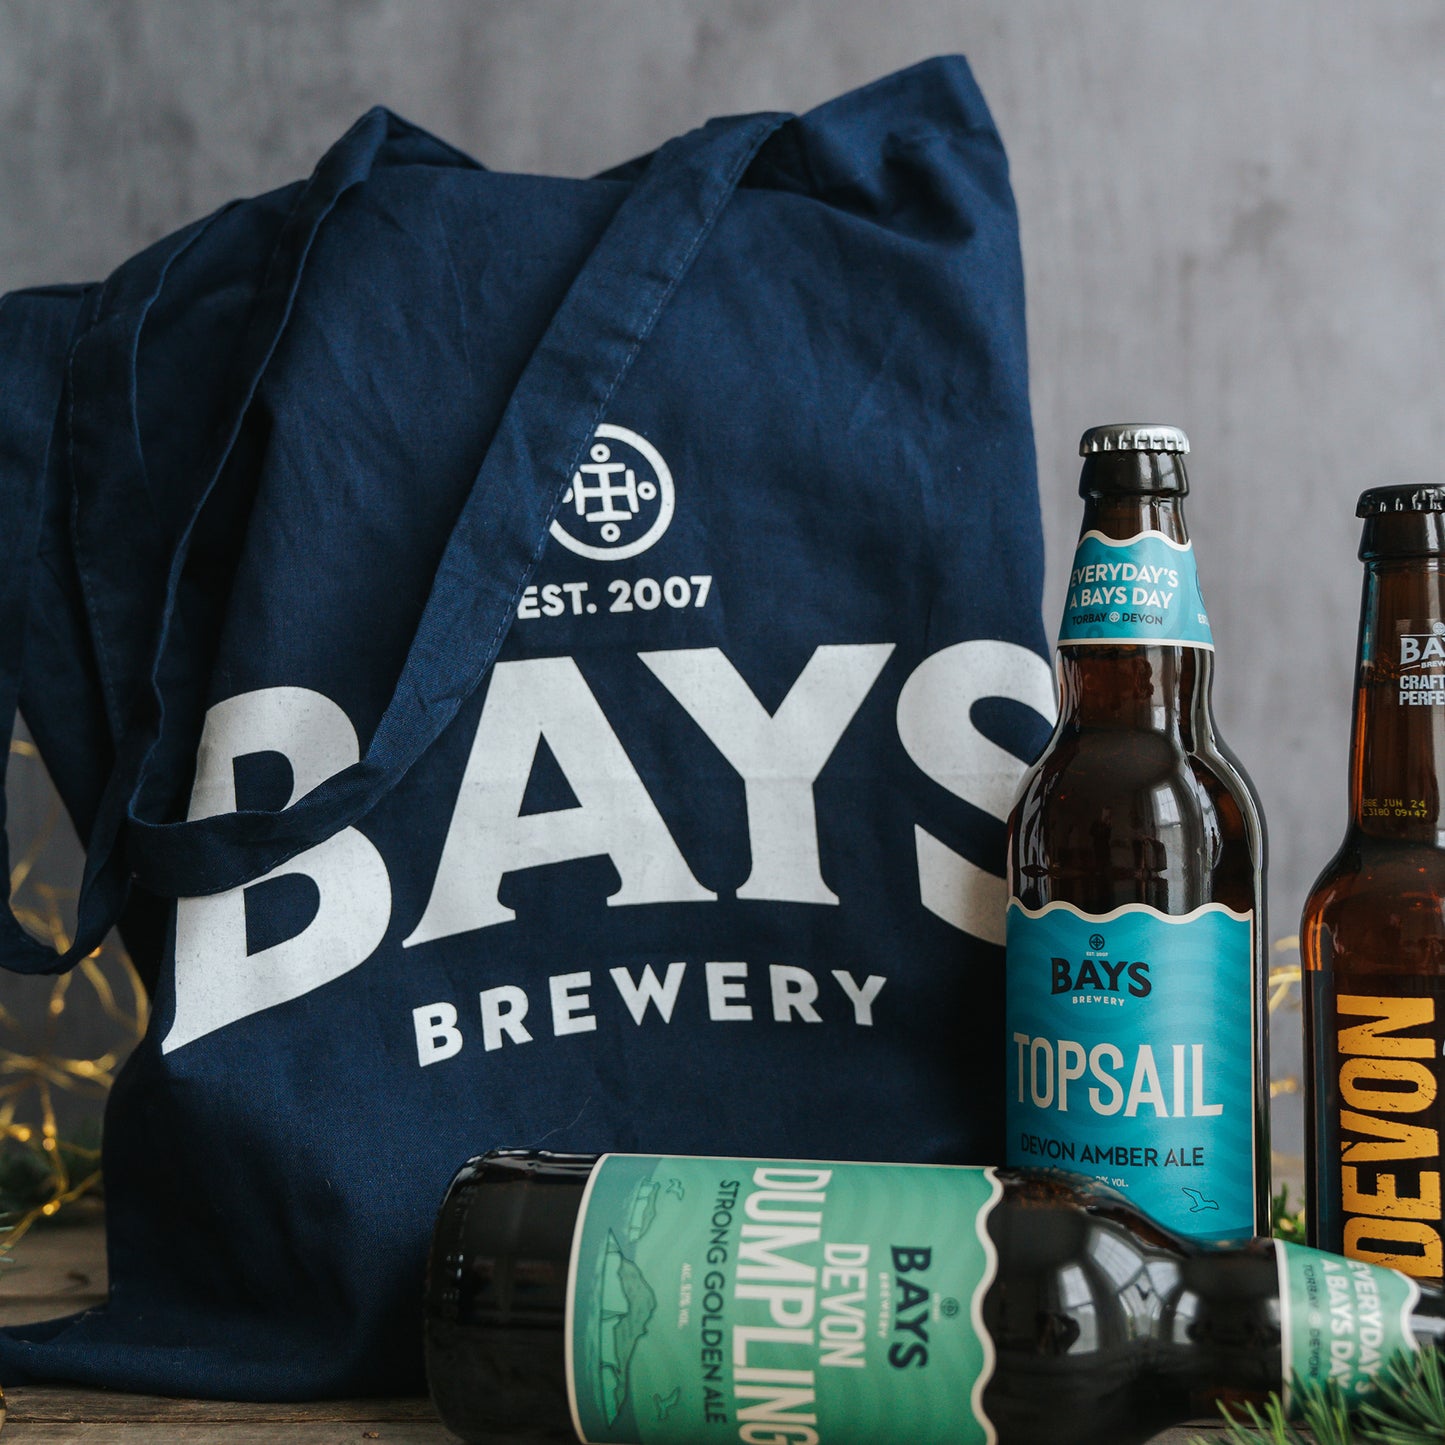 Hampers & Gifts - Bays Brewery